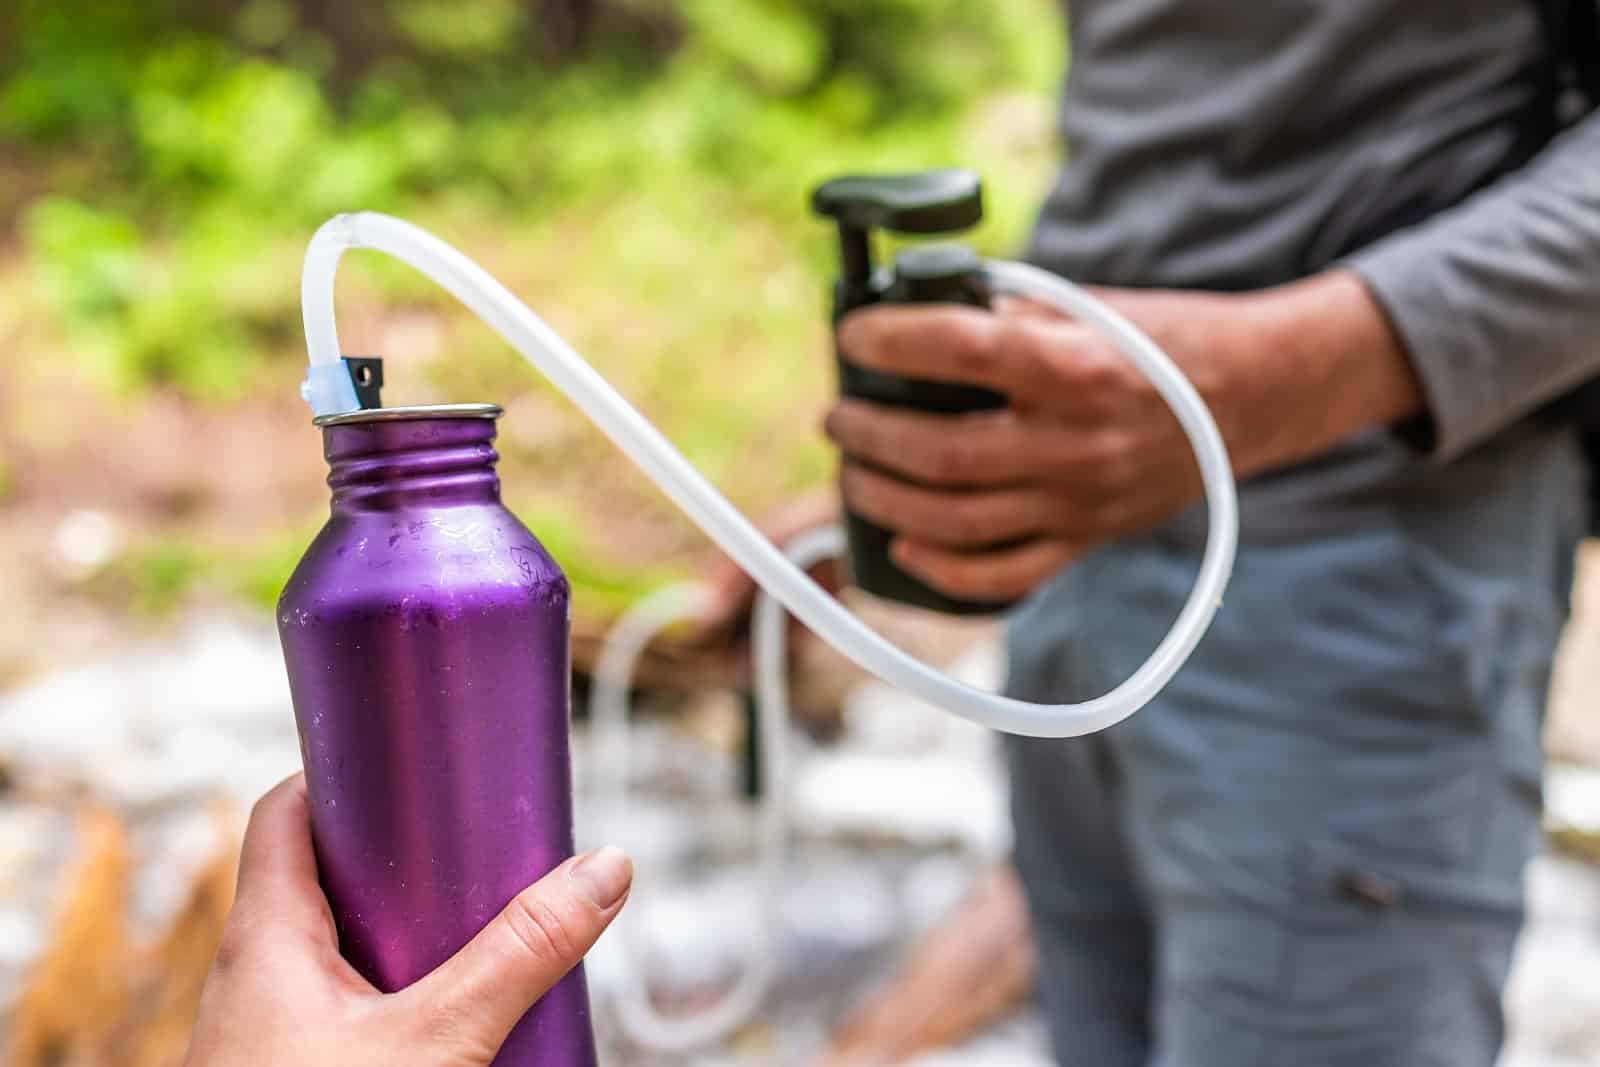 <p><span>A water purification bottle is an essential gadget for any eco-conscious traveler. These bottles have built-in filters or purification systems that can turn tap or natural water sources into safe drinking water. This ensures you have access to clean water anywhere and significantly reduces your dependency on single-use plastic water bottles.</span></p> <p><span>Some advanced models use UV light to neutralize viruses and bacteria, making them effective even in remote areas. Compact and easy to carry, a water purification bottle is a simple yet powerful tool in your sustainable travel kit.</span></p> <p><b>Insider’s Tip: </b><span>Opt for a bottle with a replaceable filter to extend its lifespan and reduce waste.</span></p>